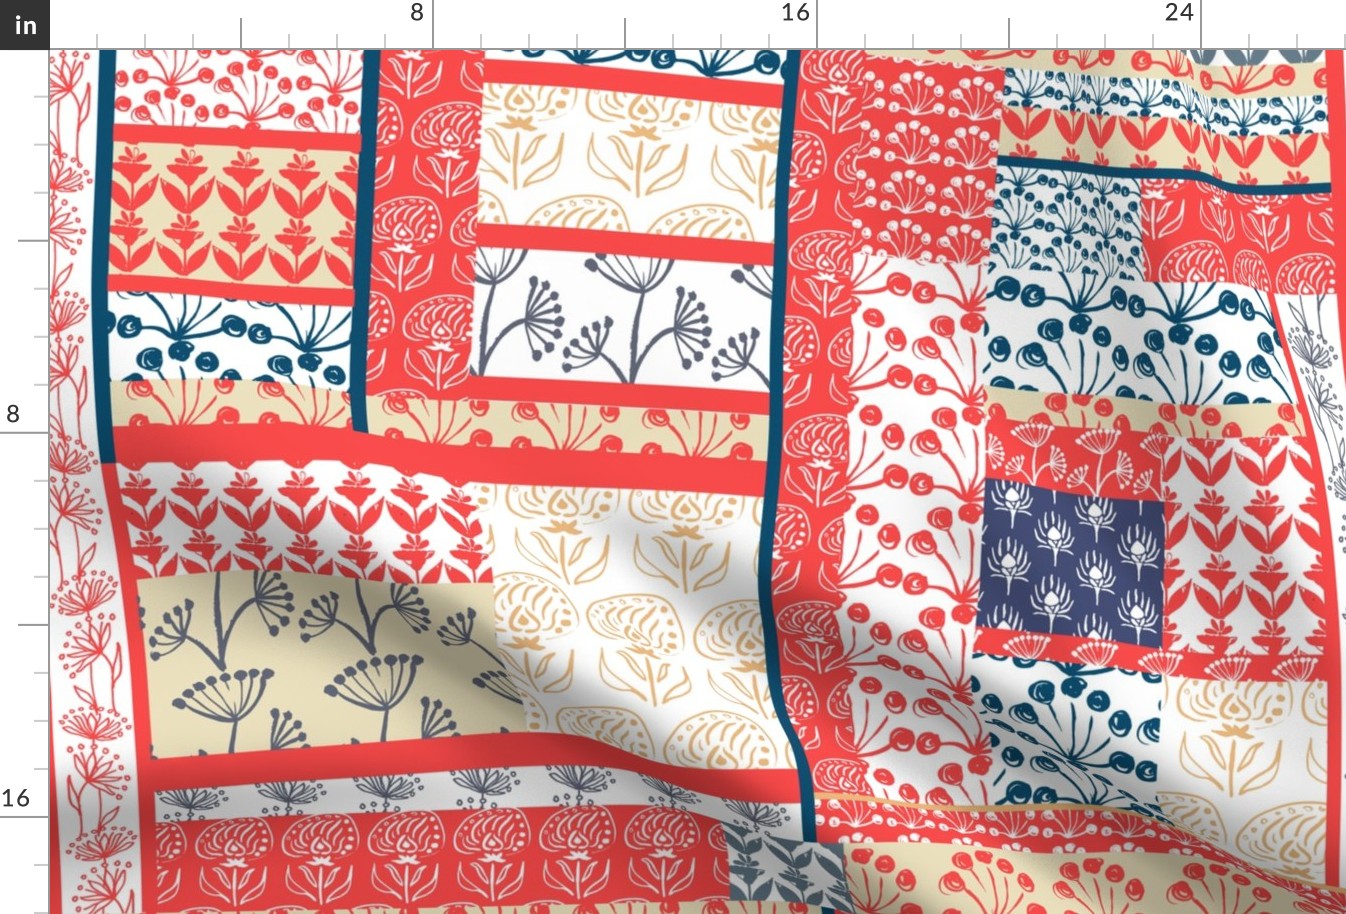 Patchwork Cheater Quilt, Drawn Patterns in Red and Blue